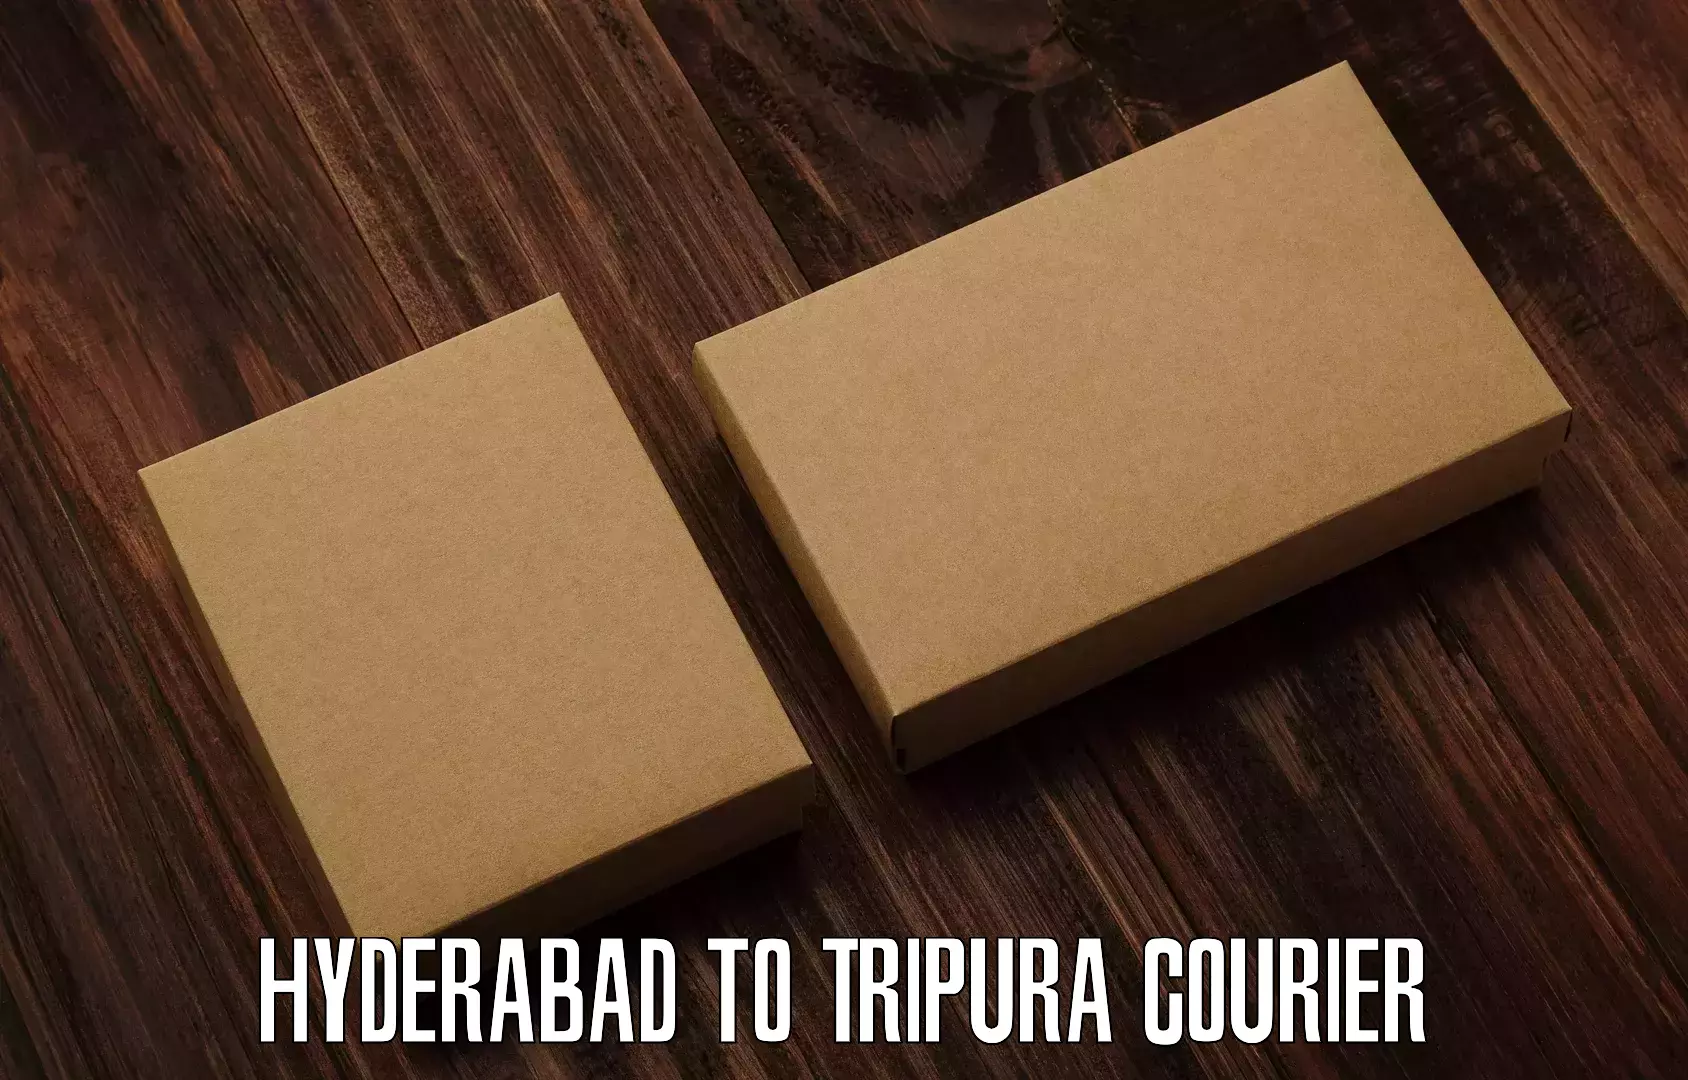 User-friendly delivery service Hyderabad to Kumarghat